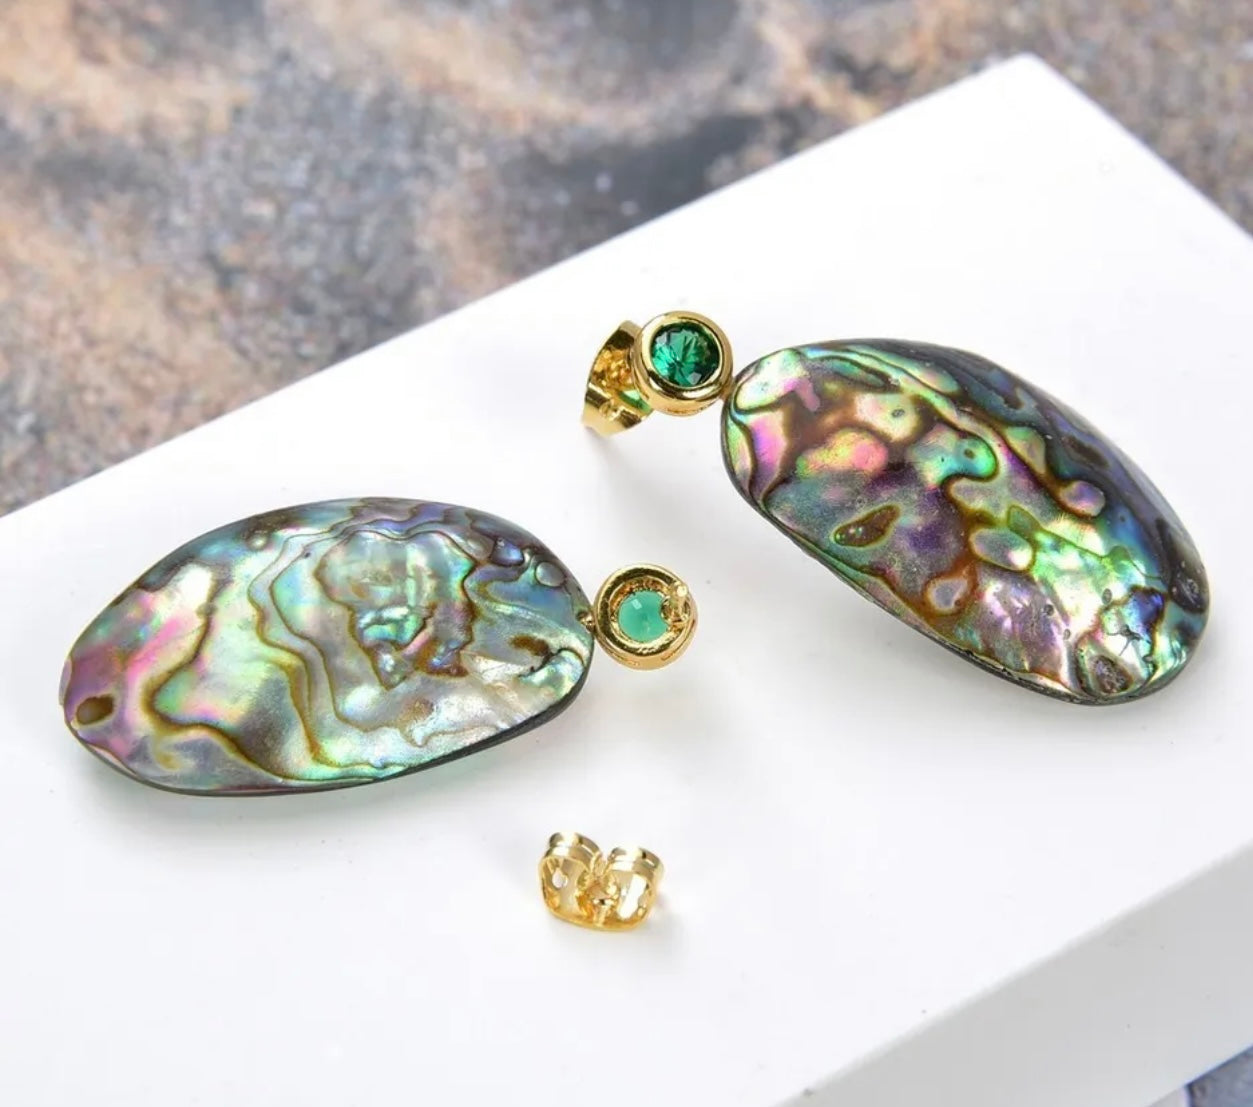 Iridescent Rainbow Abalone Shell Green Pave Stud Statement Earrings 1.5"